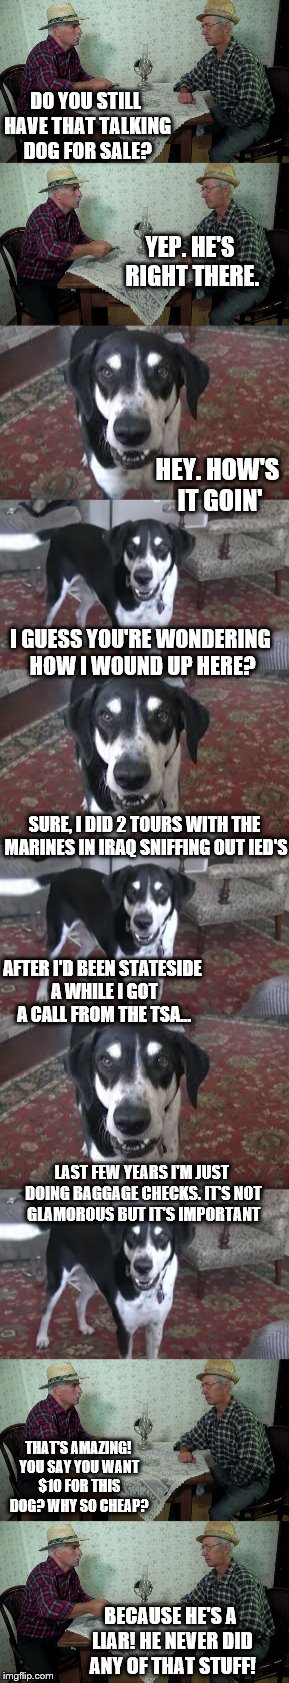 talking dog | DO YOU STILL HAVE THAT TALKING DOG FOR SALE? YEP. HE'S RIGHT THERE. HEY. HOW'S IT GOIN'; I GUESS YOU'RE WONDERING HOW I WOUND UP HERE? SURE, I DID 2 TOURS WITH THE MARINES IN IRAQ SNIFFING OUT IED'S; AFTER I'D BEEN STATESIDE A WHILE I GOT A CALL FROM THE TSA... LAST FEW YEARS I'M JUST DOING BAGGAGE CHECKS. IT'S NOT GLAMOROUS BUT IT'S IMPORTANT; THAT'S AMAZING! YOU SAY YOU WANT $10 FOR THIS DOG? WHY SO CHEAP? BECAUSE HE'S A LIAR! HE NEVER DID ANY OF THAT STUFF! | image tagged in talking dog | made w/ Imgflip meme maker